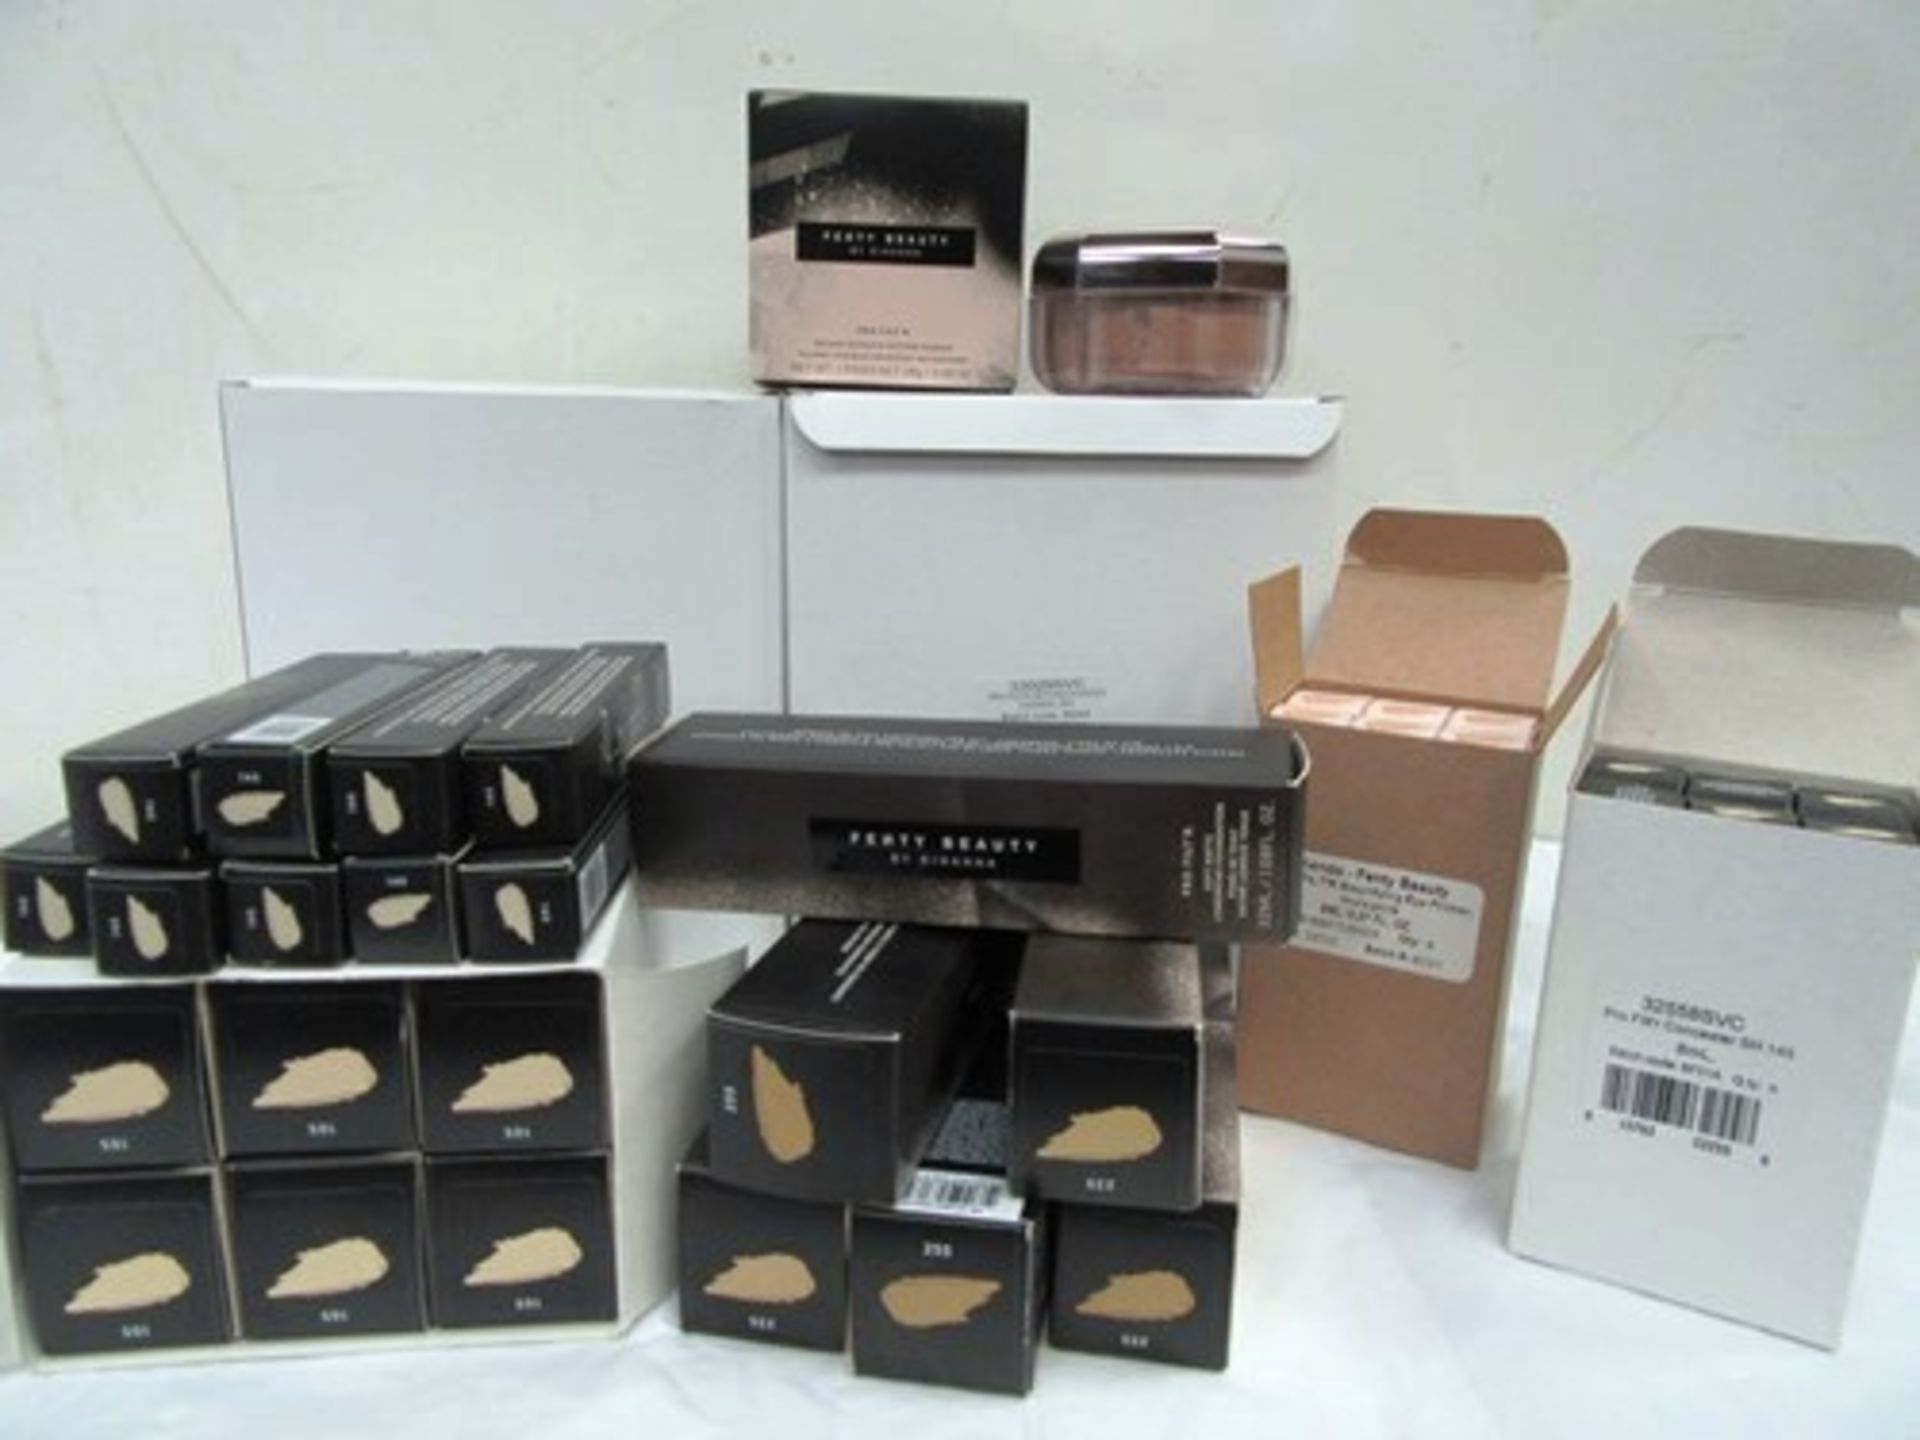 A selection of Fenty Beauty cosmetics to include 12 x 28g pots of Cashew setting powder, concealer